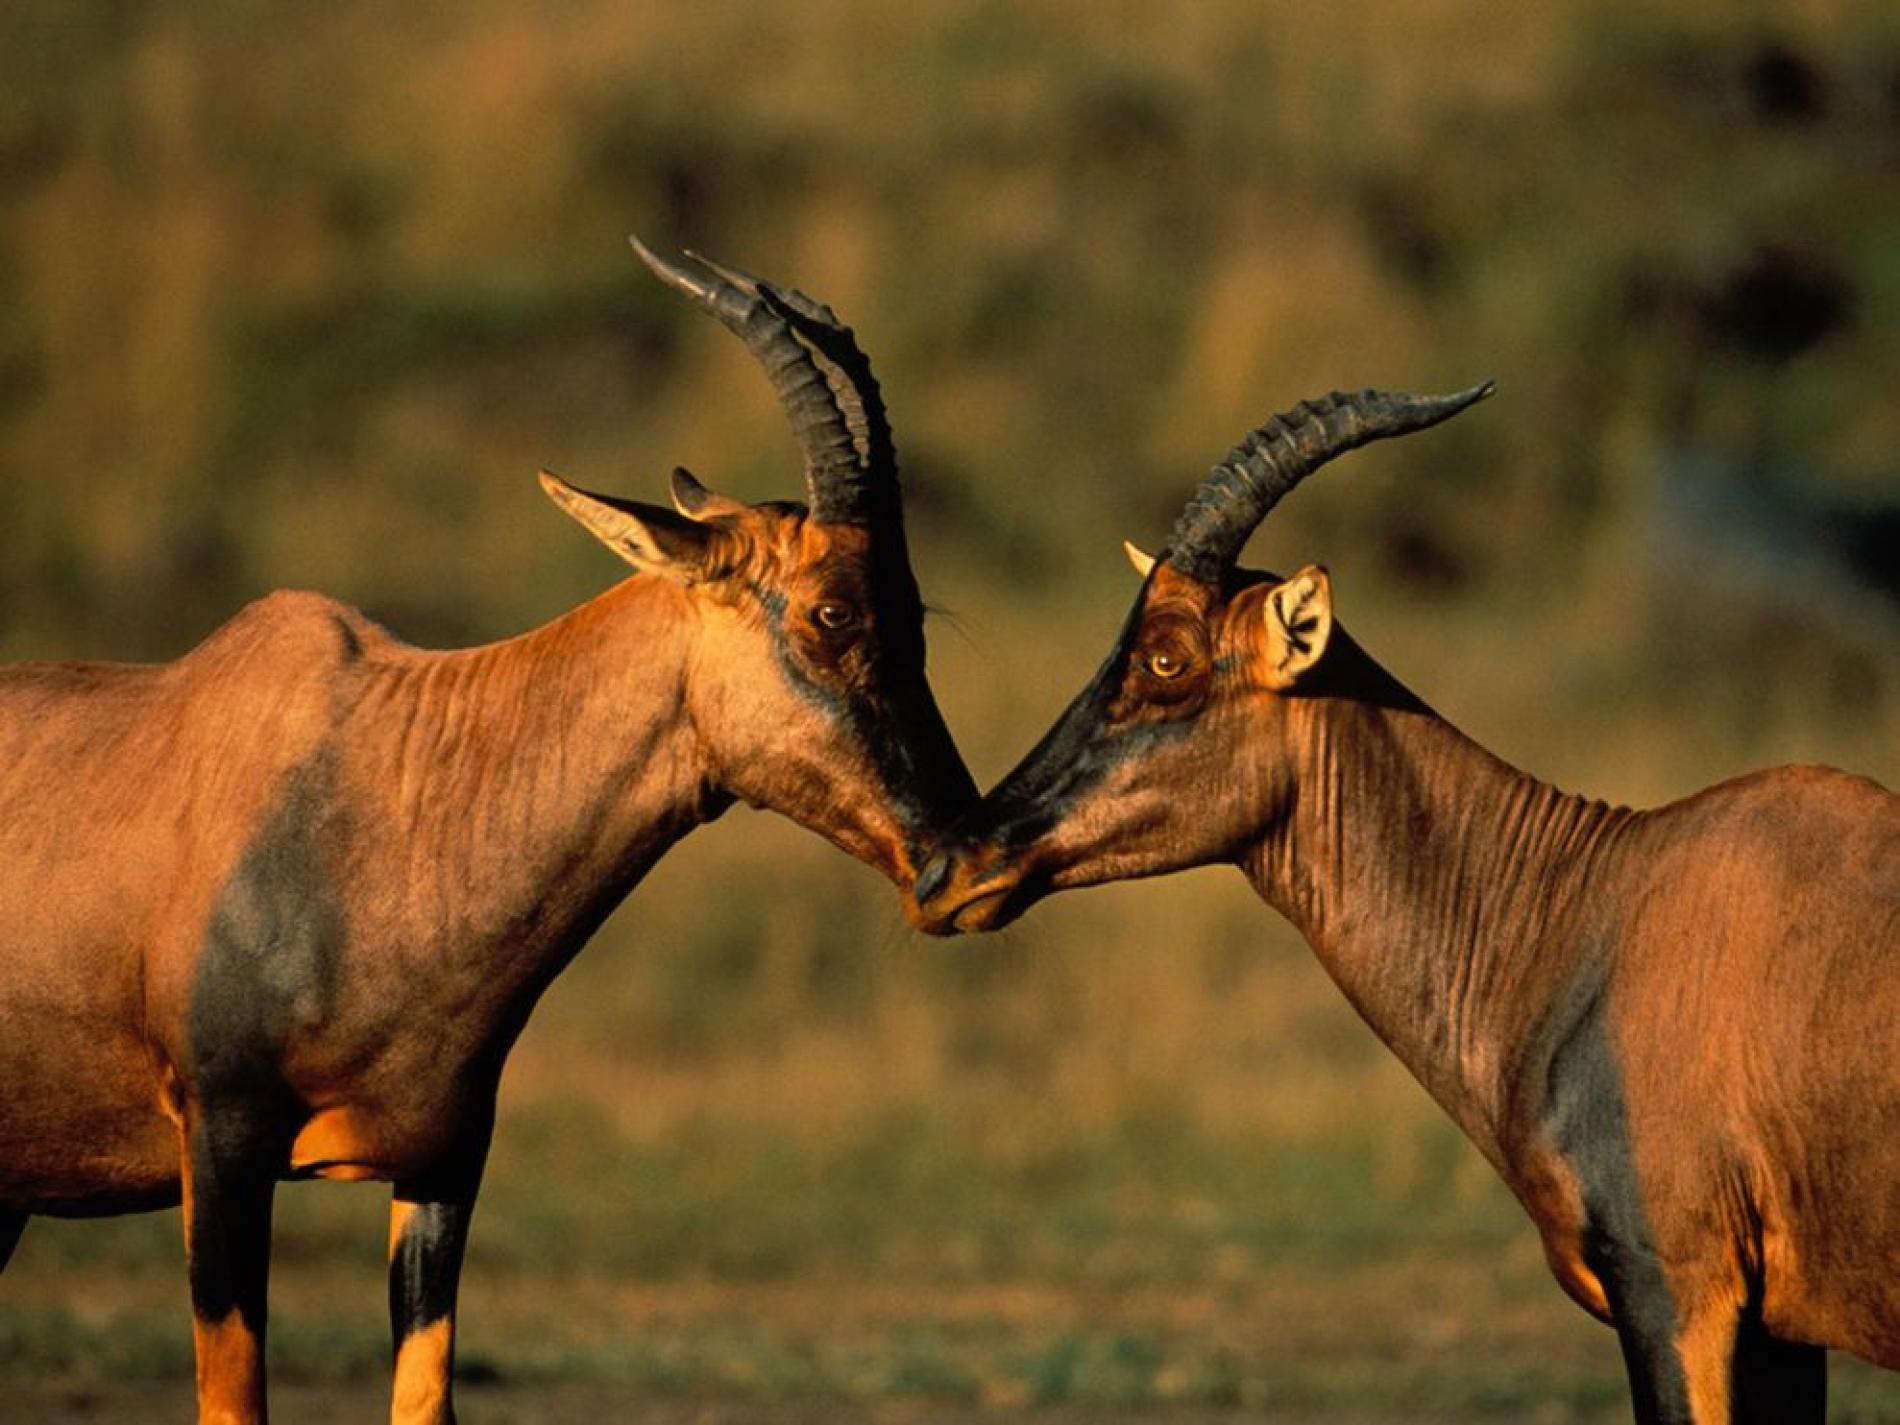 Male Antelope Scare Females Into Staying for Sex